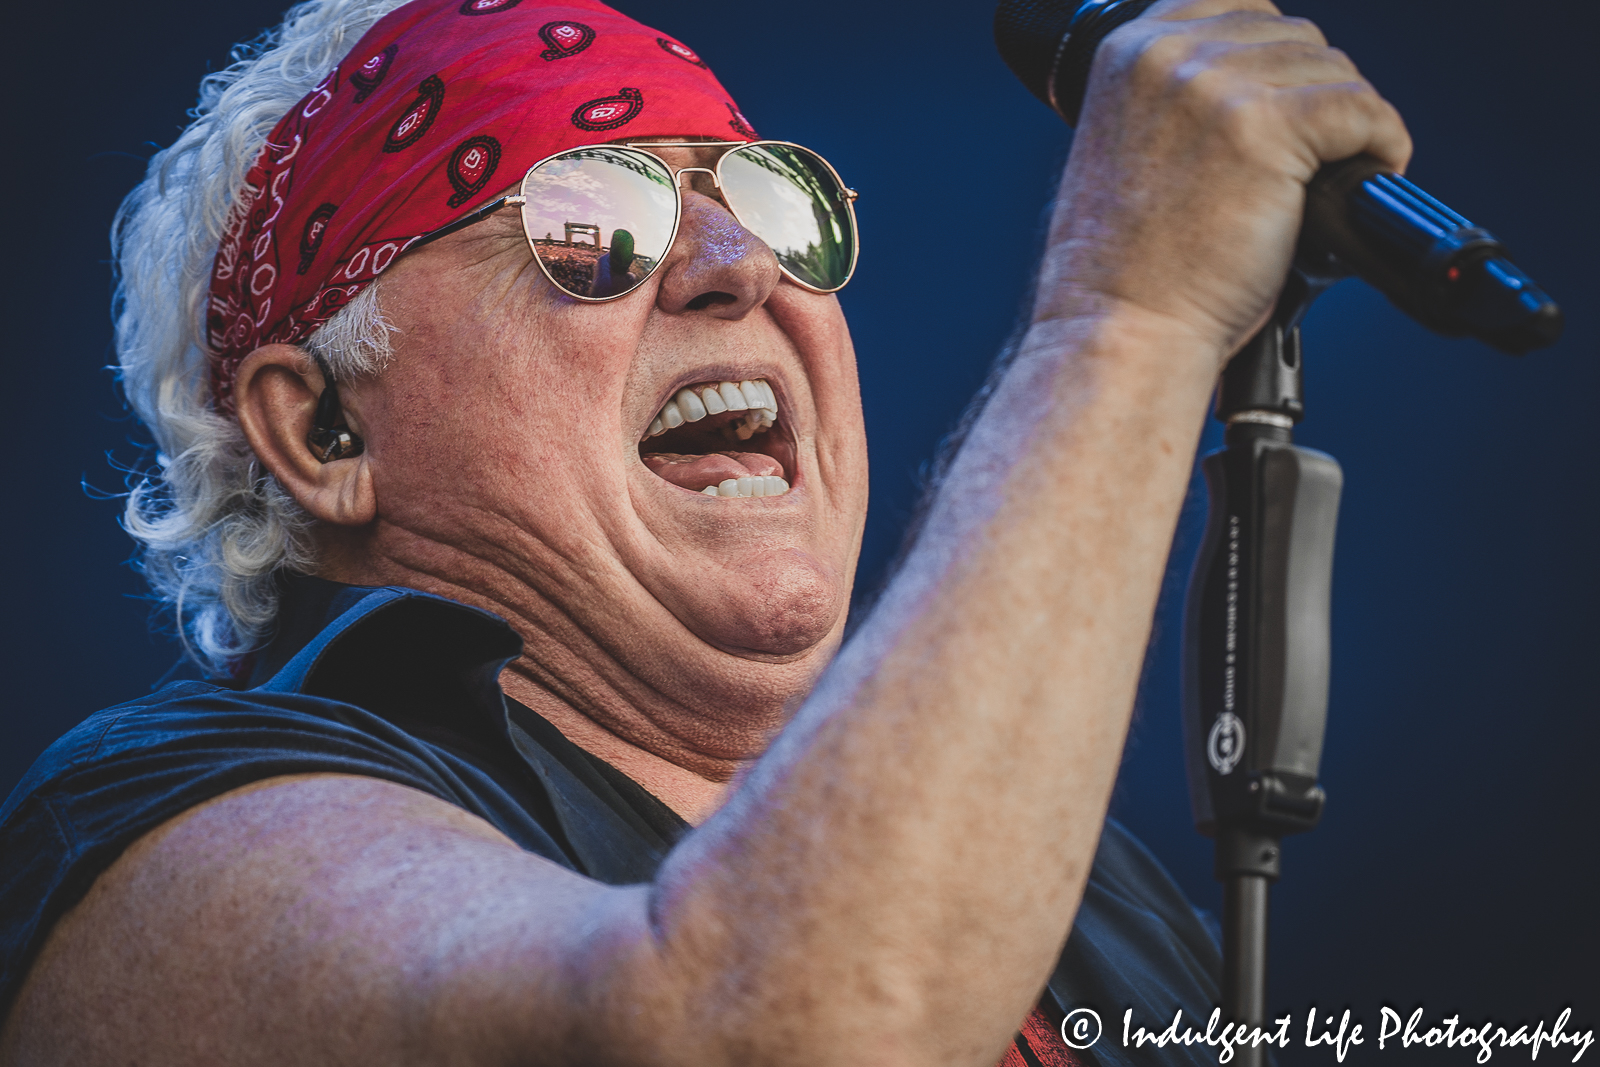 Loverboy frontman Mike Reno singing "Lucky Ones" live in concert at Starlight Theatre in Kansas City, MO on July 18, 2023.